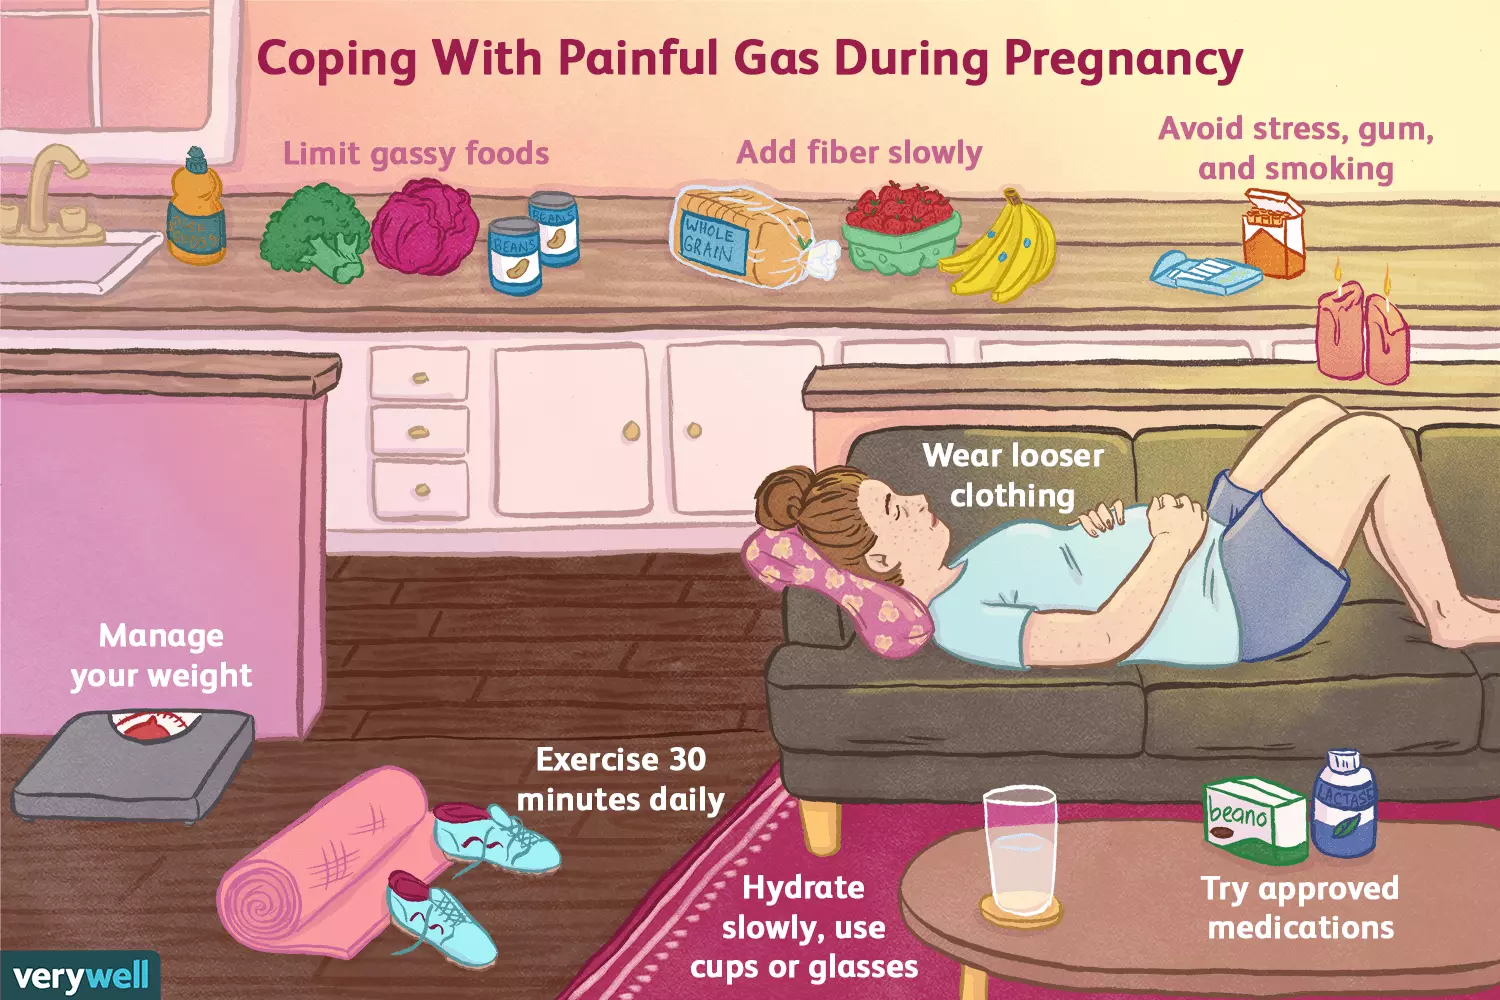 Painful gas during pregnancy